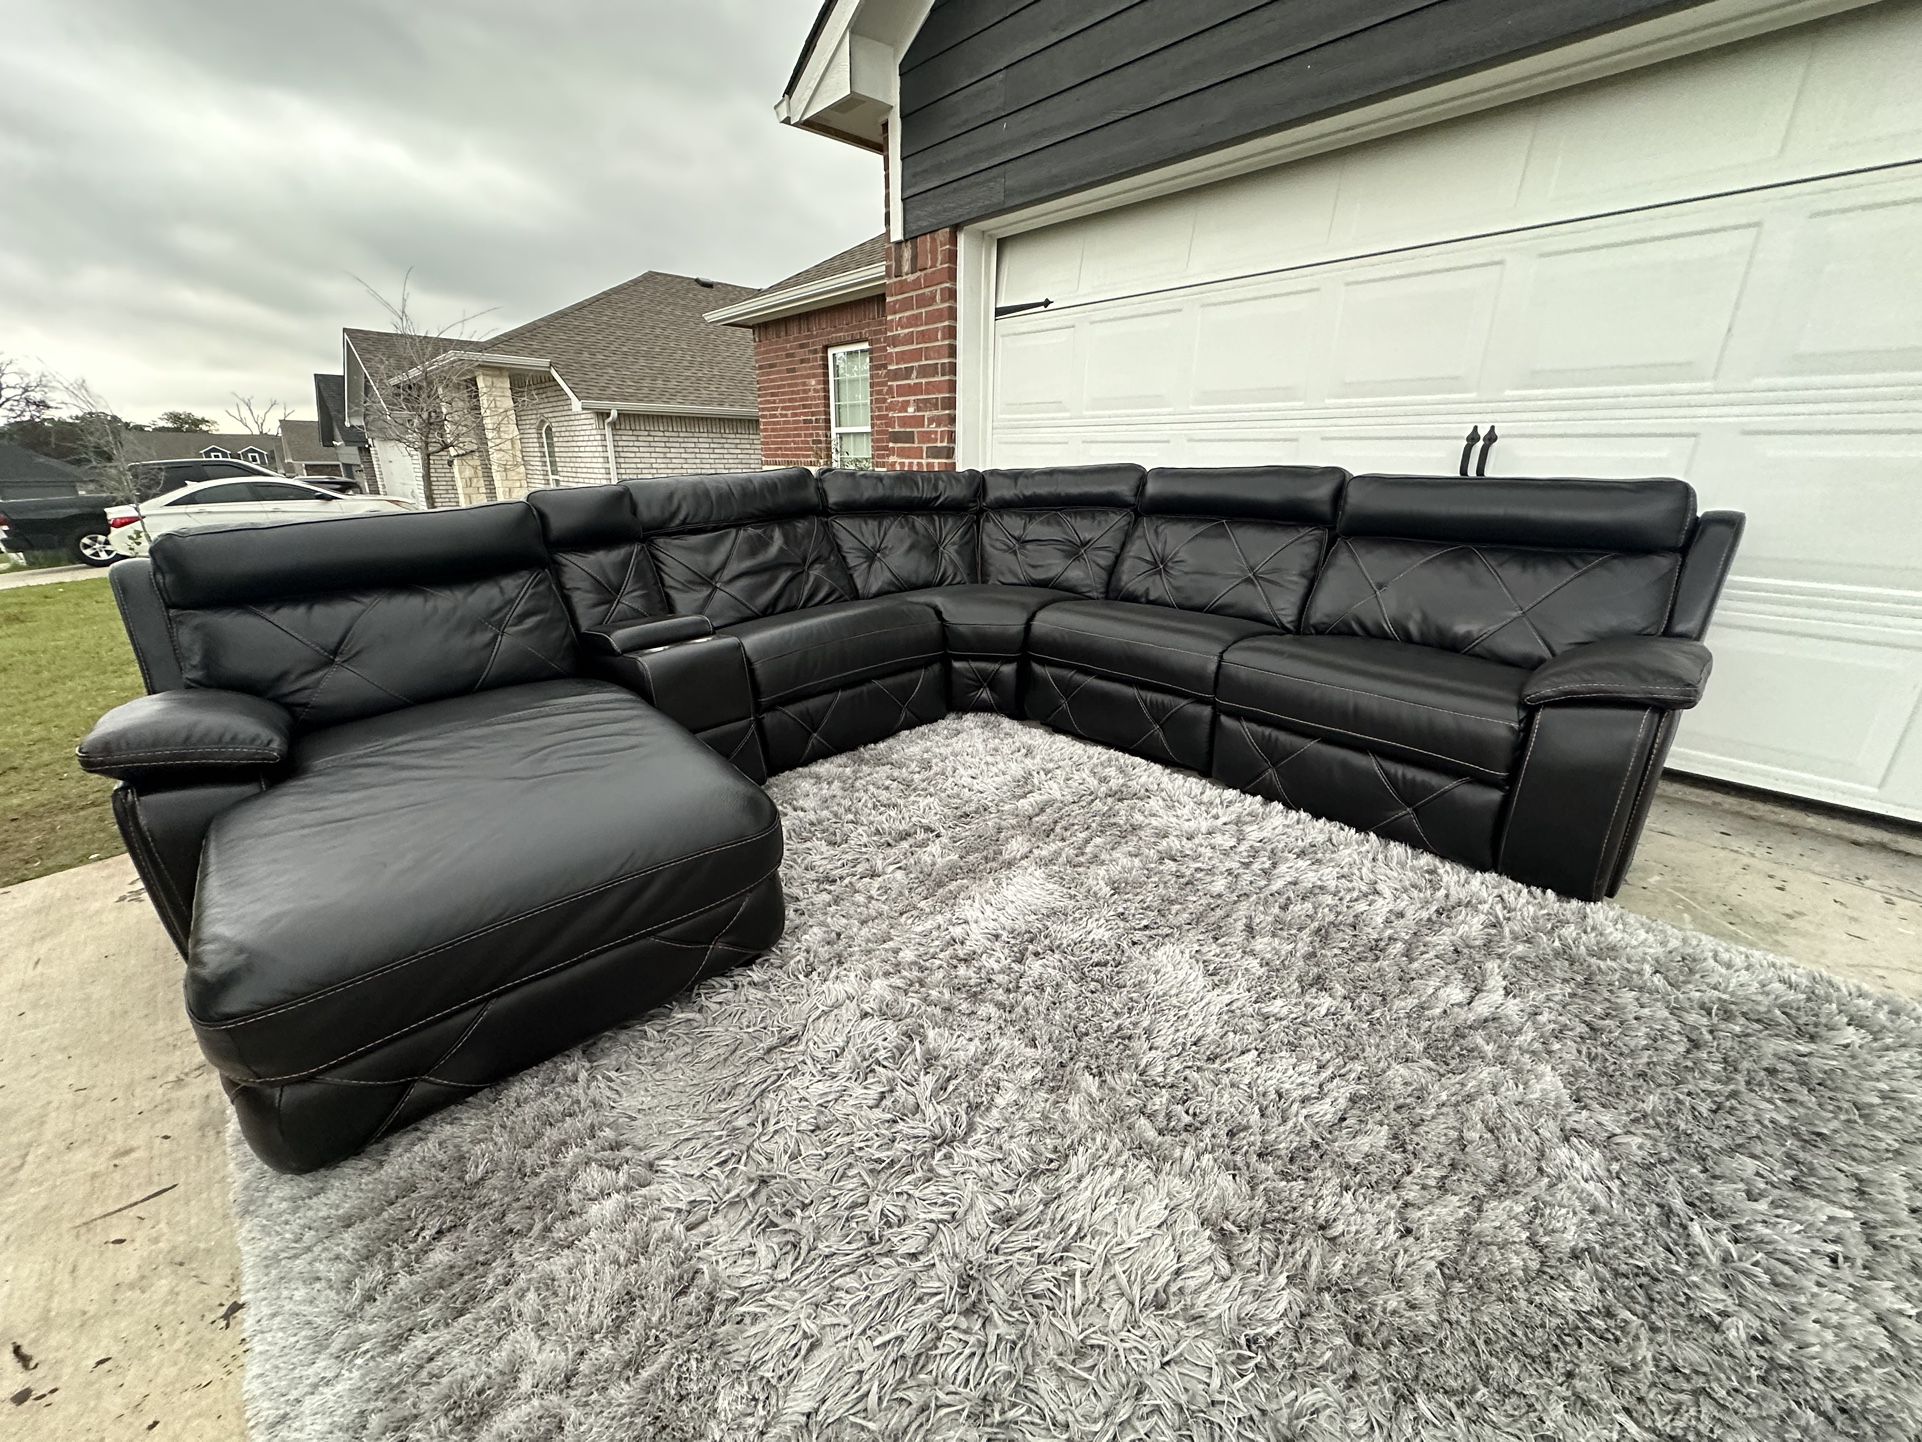 Balck Sectional Leather Recliner  Brand Cindy Crawford 🚚✅